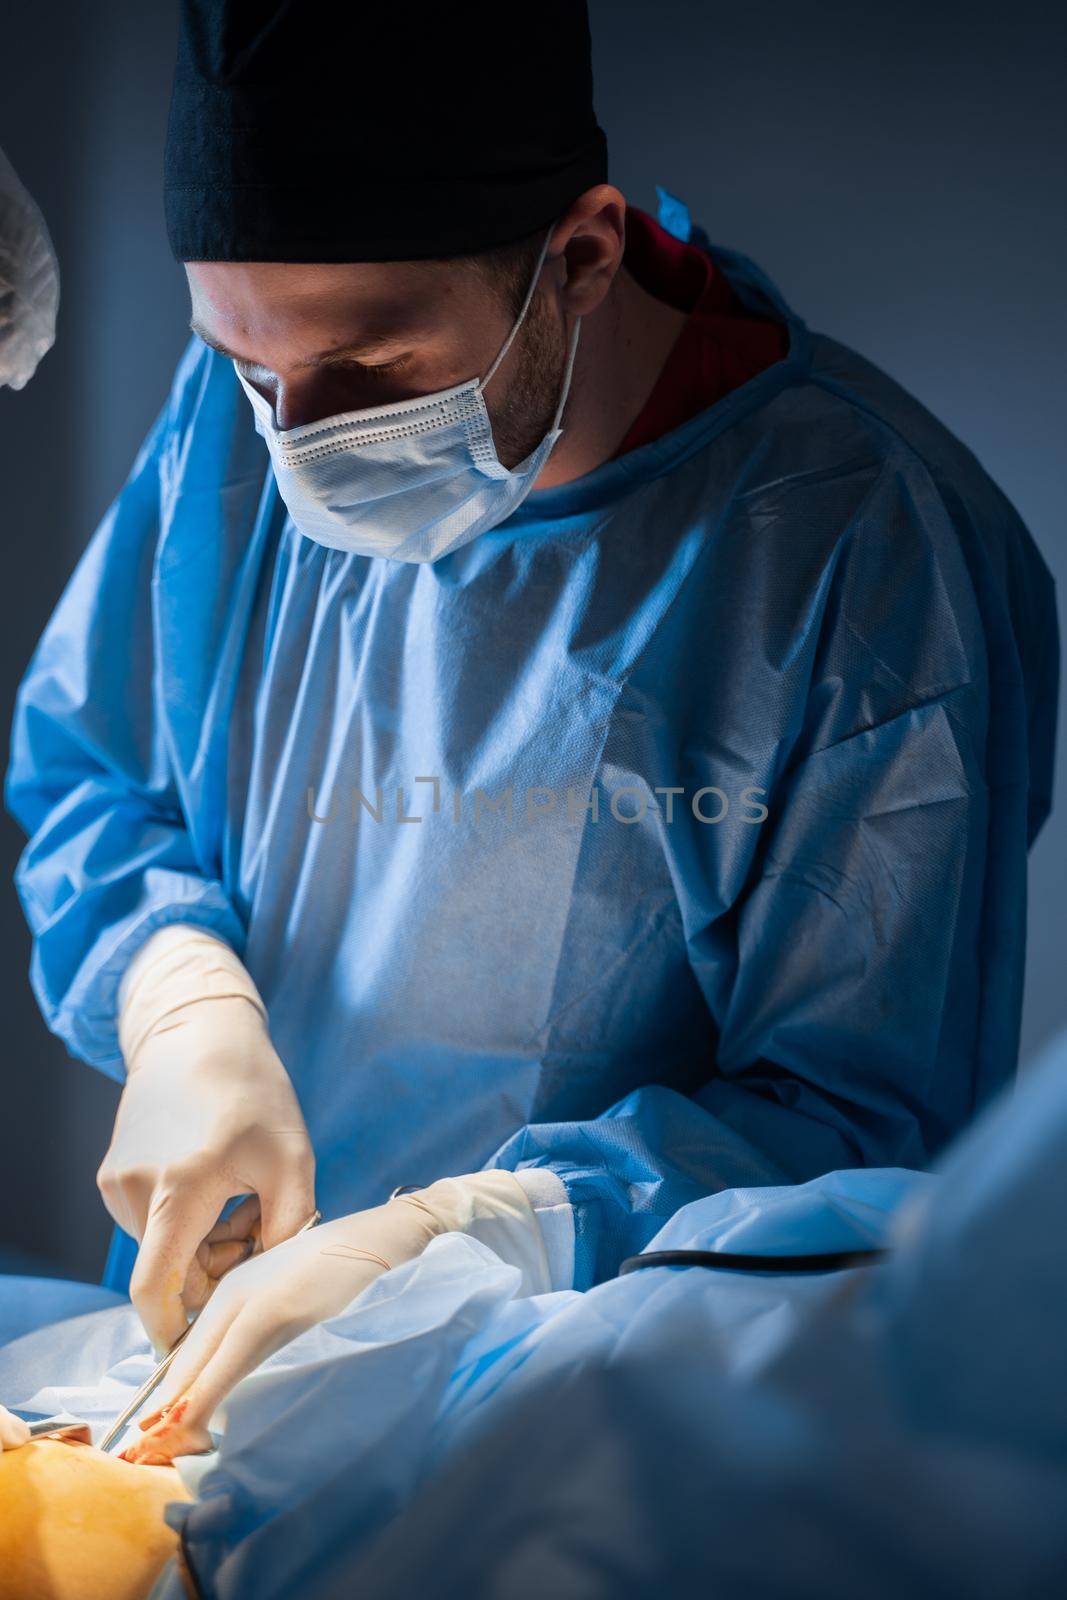 Vascular surgeon removing veins from the leg